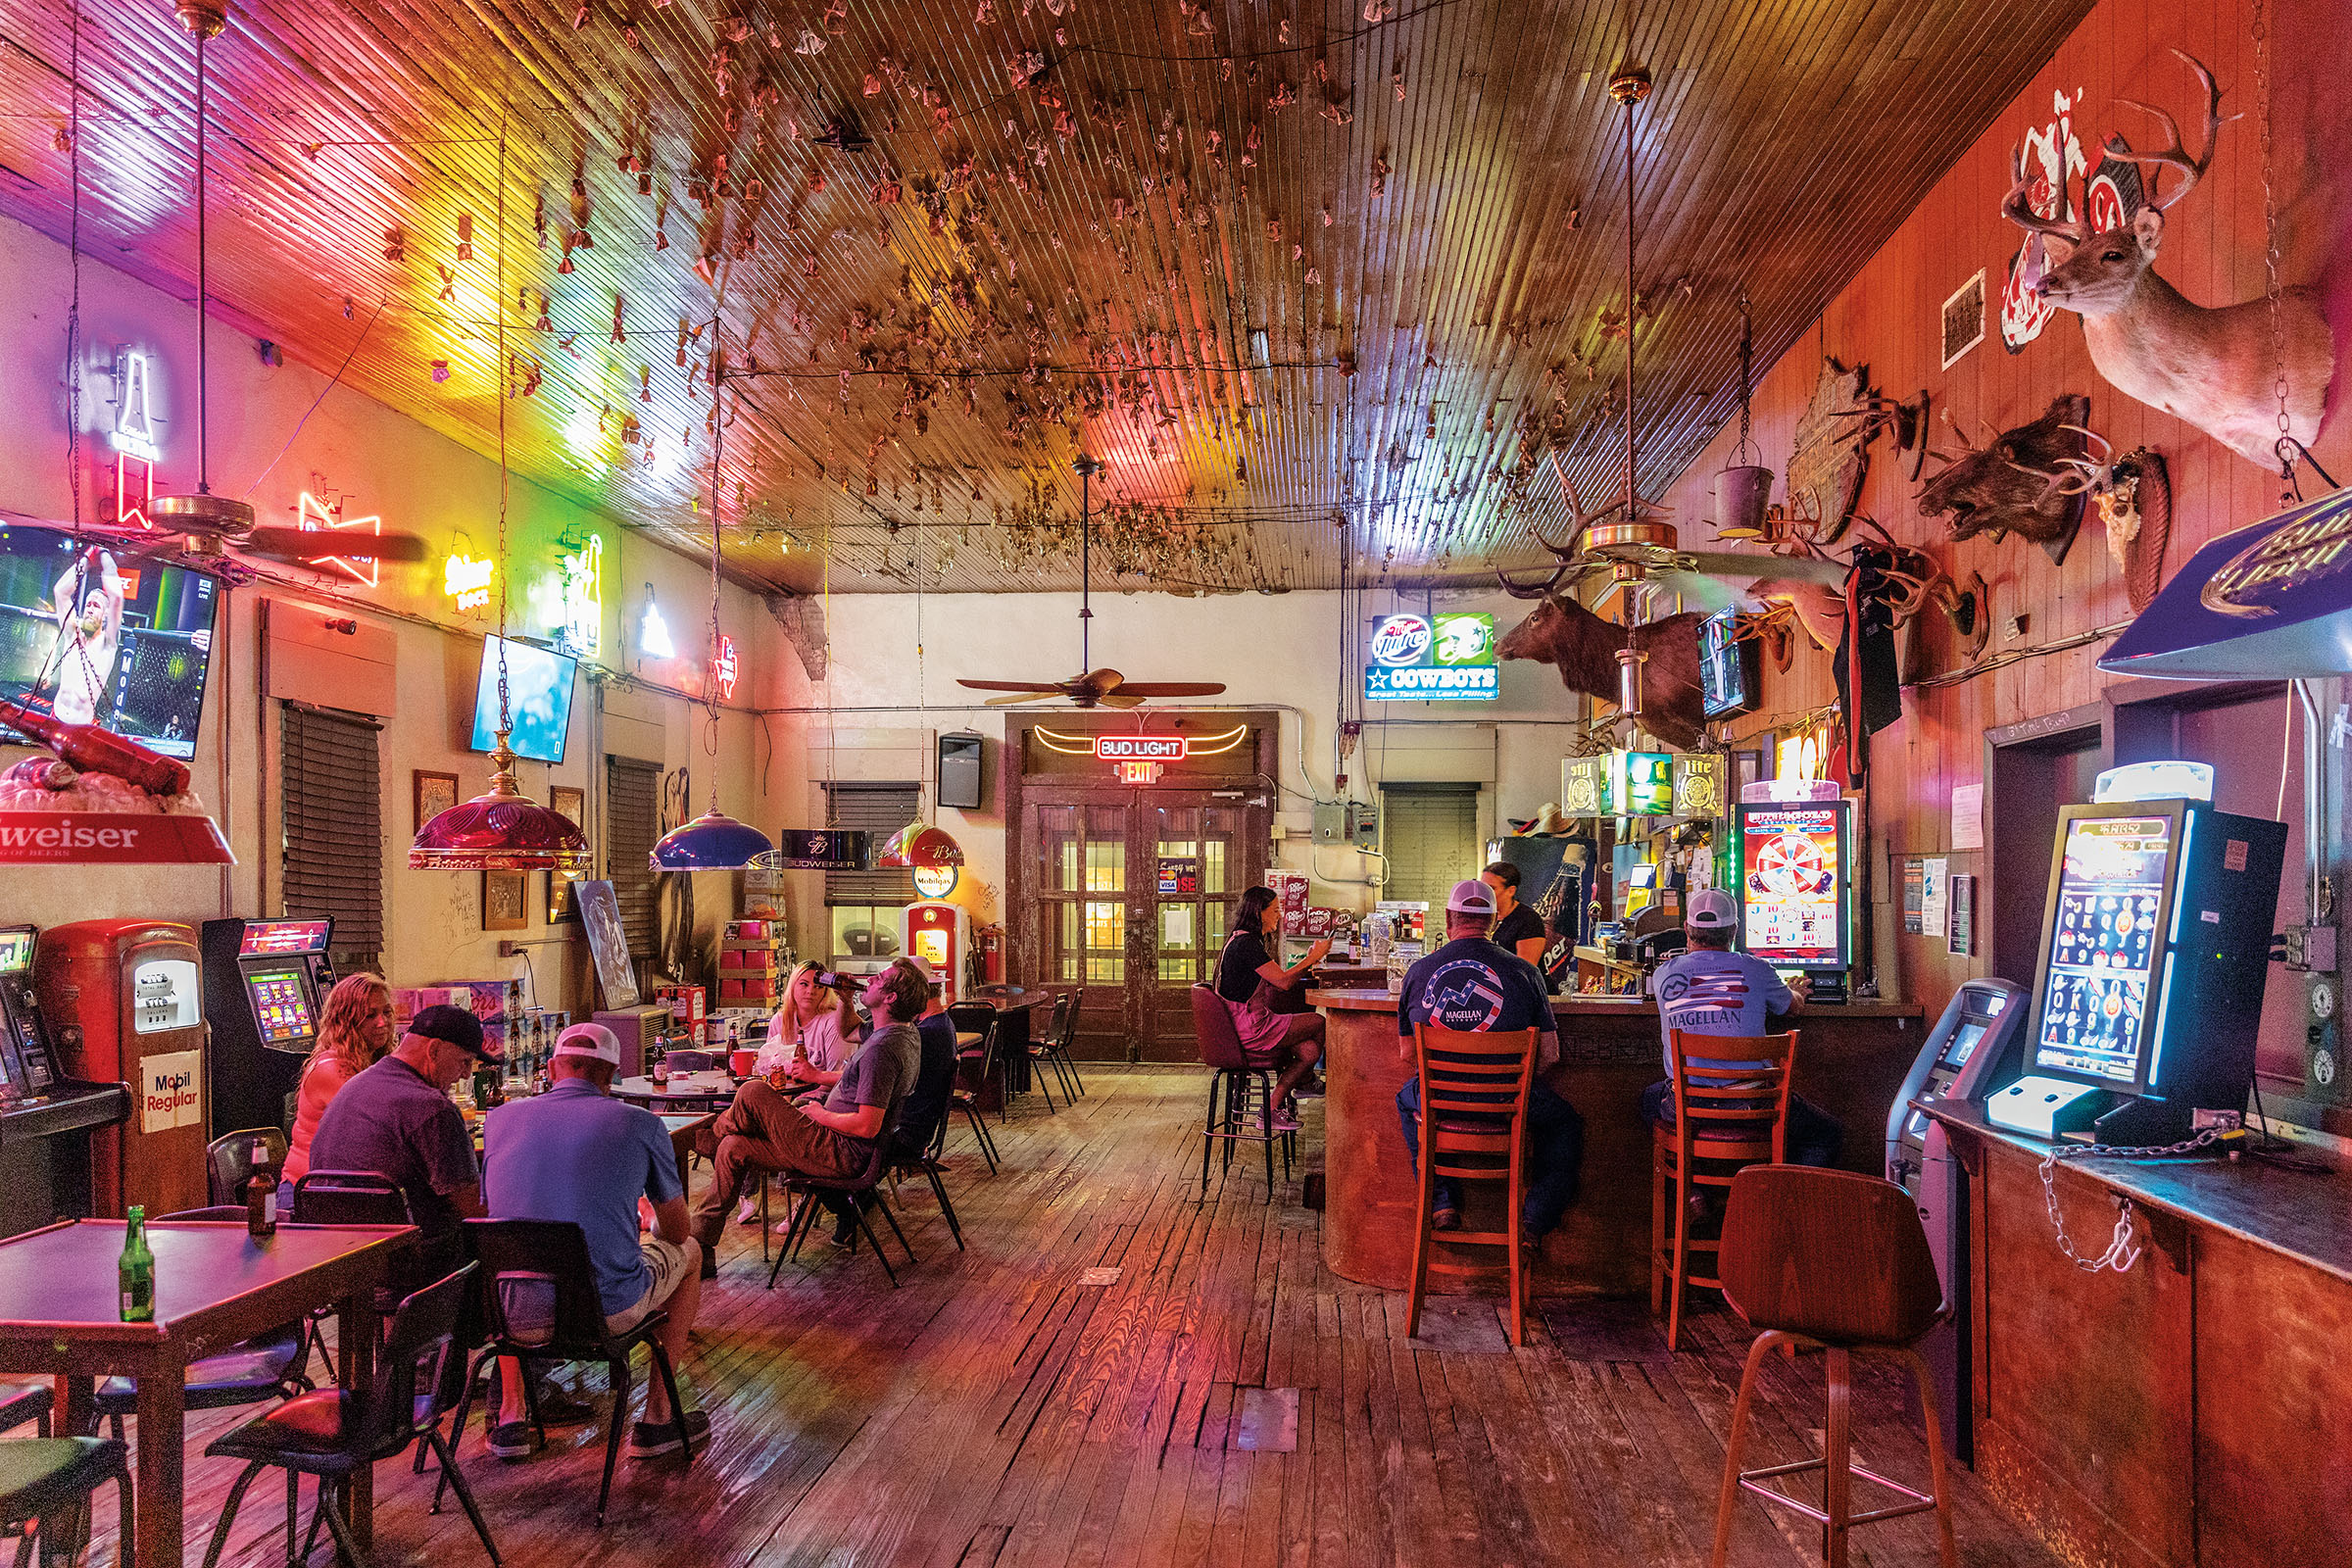 Patrons sit at a brightly-colored bar with wooden ceiling and dollar bills